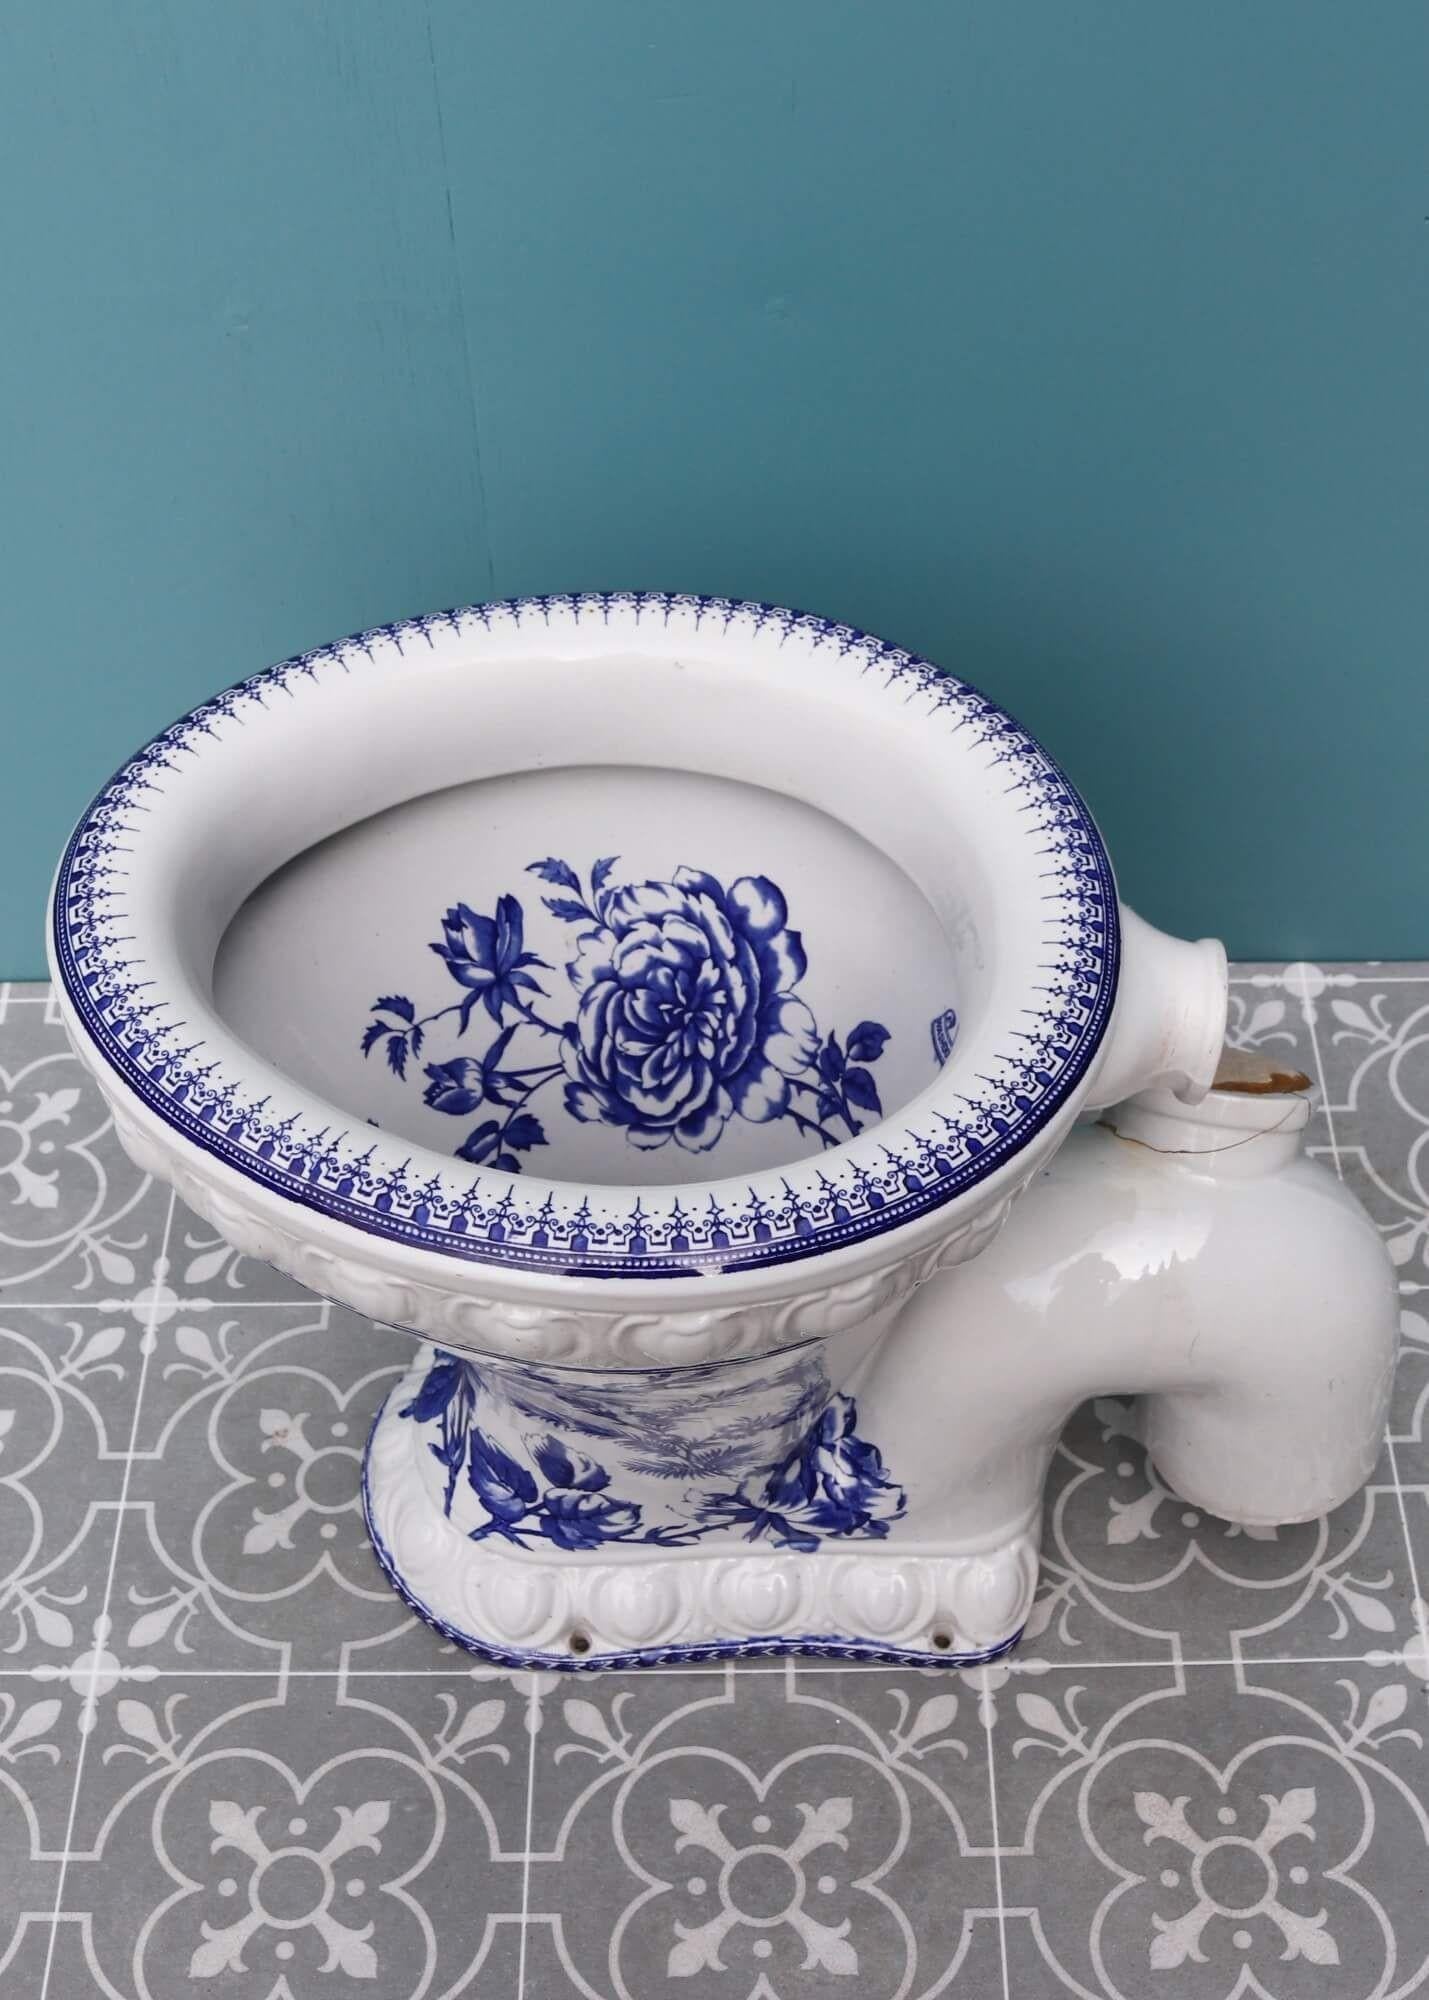 The Excelsior was a famed model of its time. Dating from the 1880s, this English Victorian toilet is perfect for recreating a Victorian bathroom or restroom. It features an attractive blue and white patterned bowl and decorative moulding to the